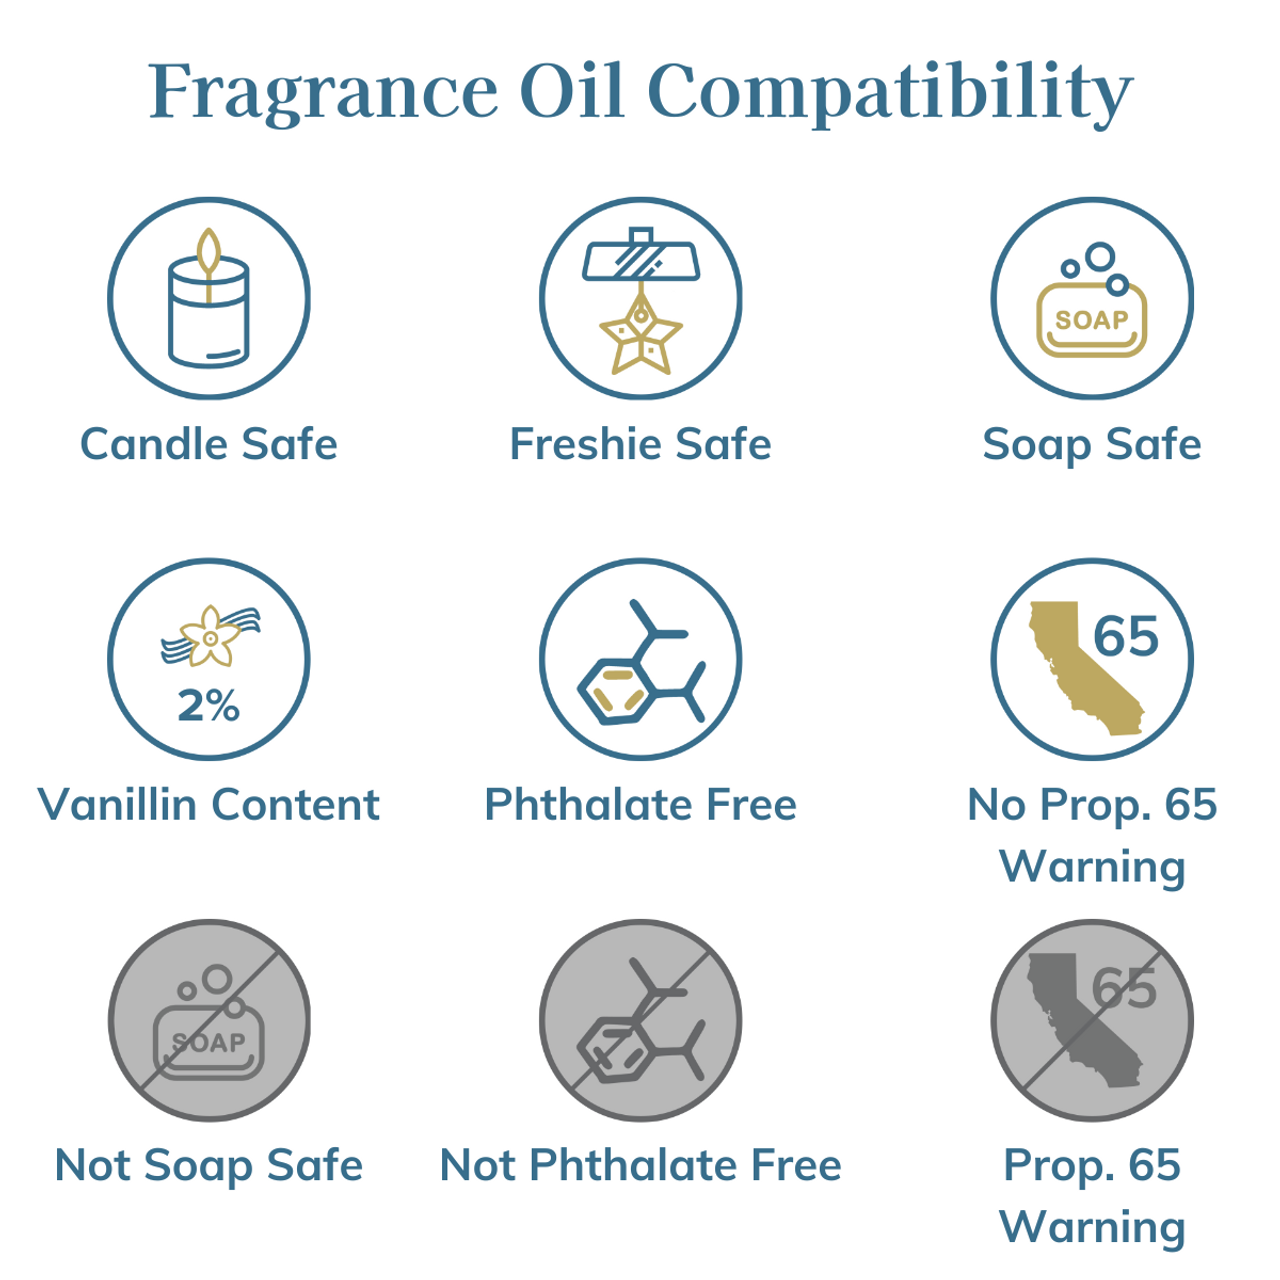 Amber Romance Fragrance Oil for Candle Making and Soap Making 1 Oz, 4 Oz, 8  Oz, 16 Oz Jasmine, Vanilla, Musk, Floral Phthalate Free 